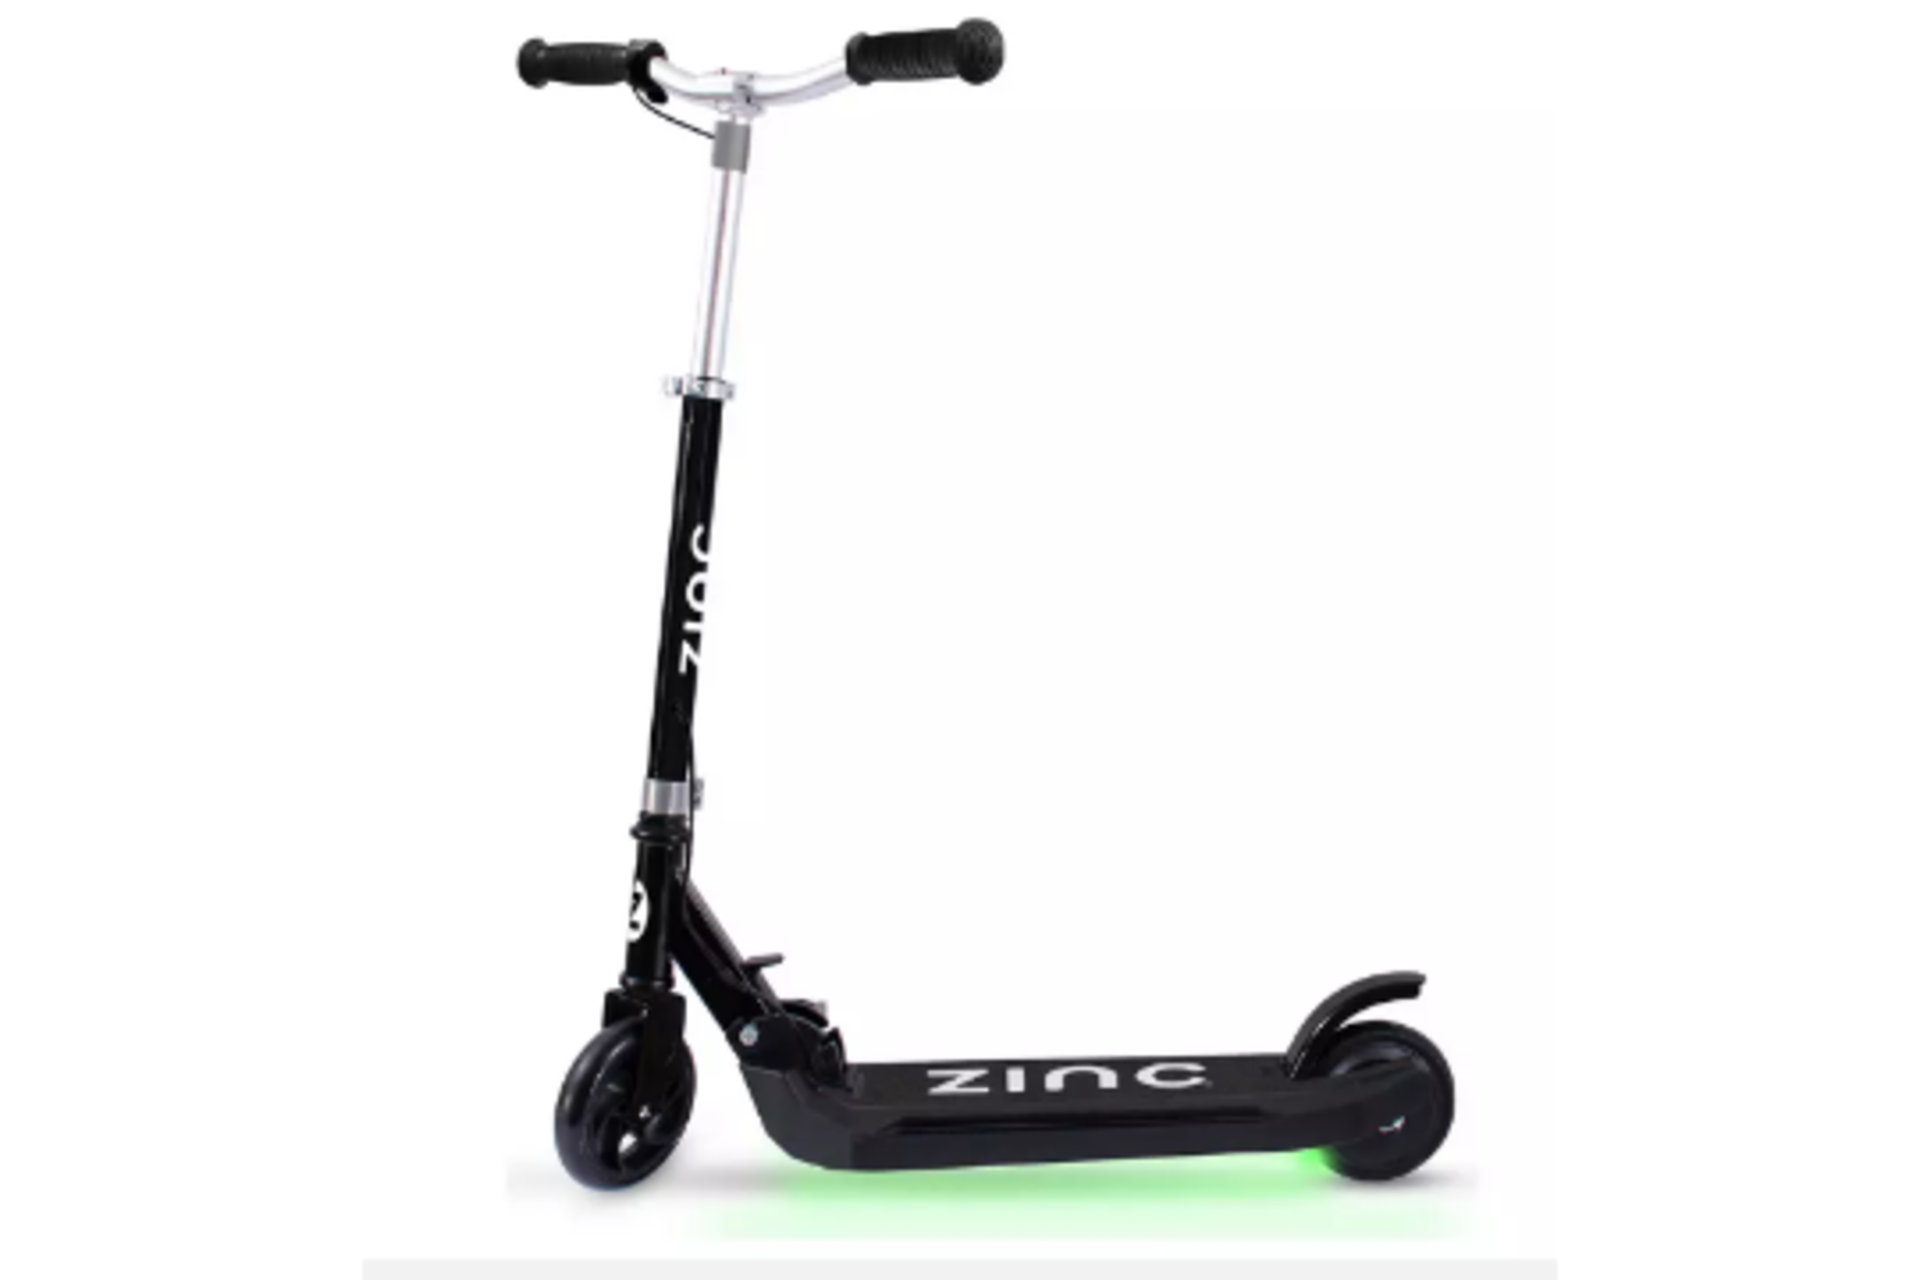 Zinc Folding Light Up Electric E5 Scooter. RRP £195.00. - BW. There is tons of fun to be had with